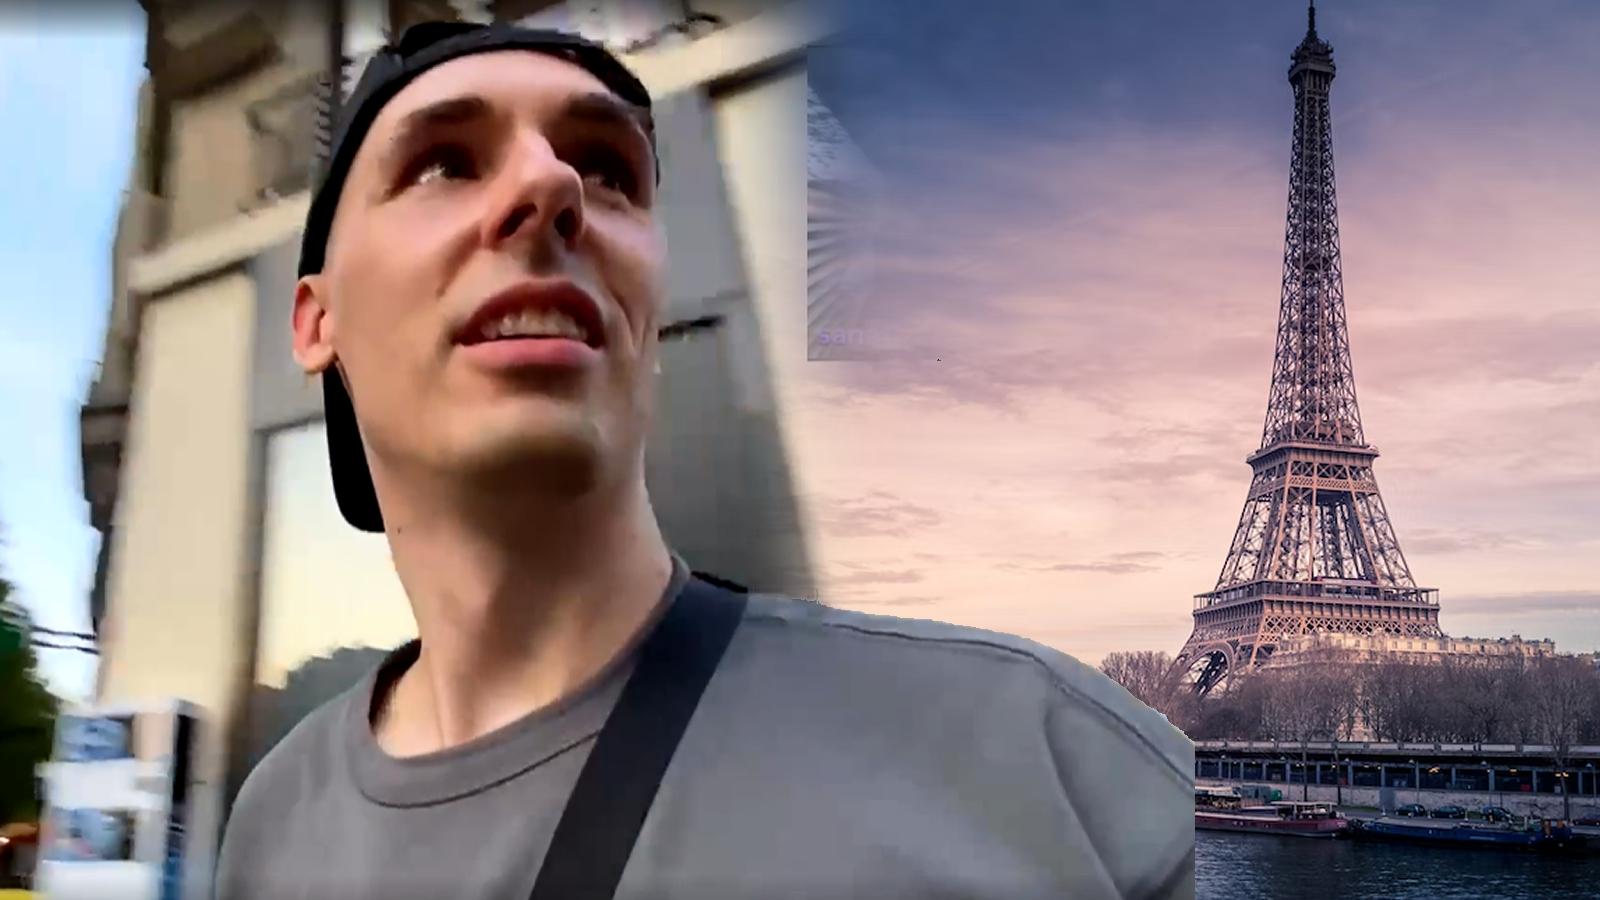 German IRL Twitch streamer attacked while live in Paris